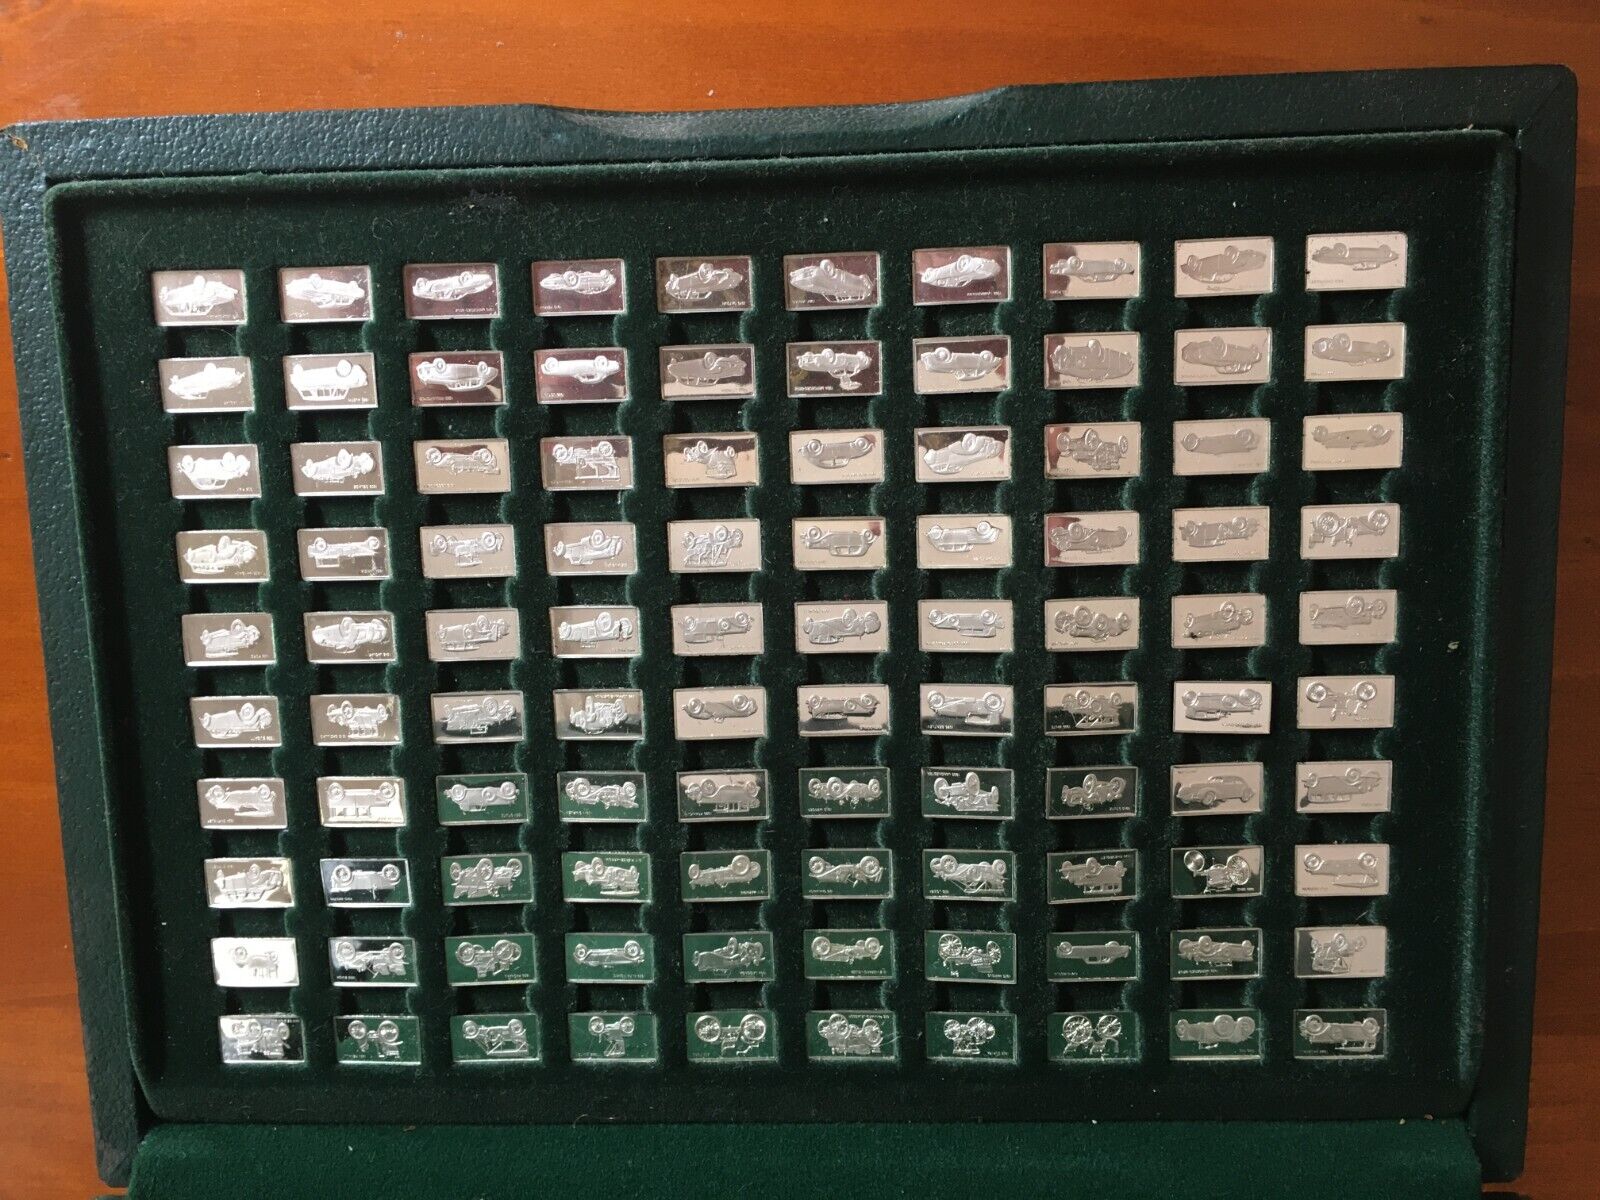 The 100 greatest cars silver ingot miniature collection original display cases